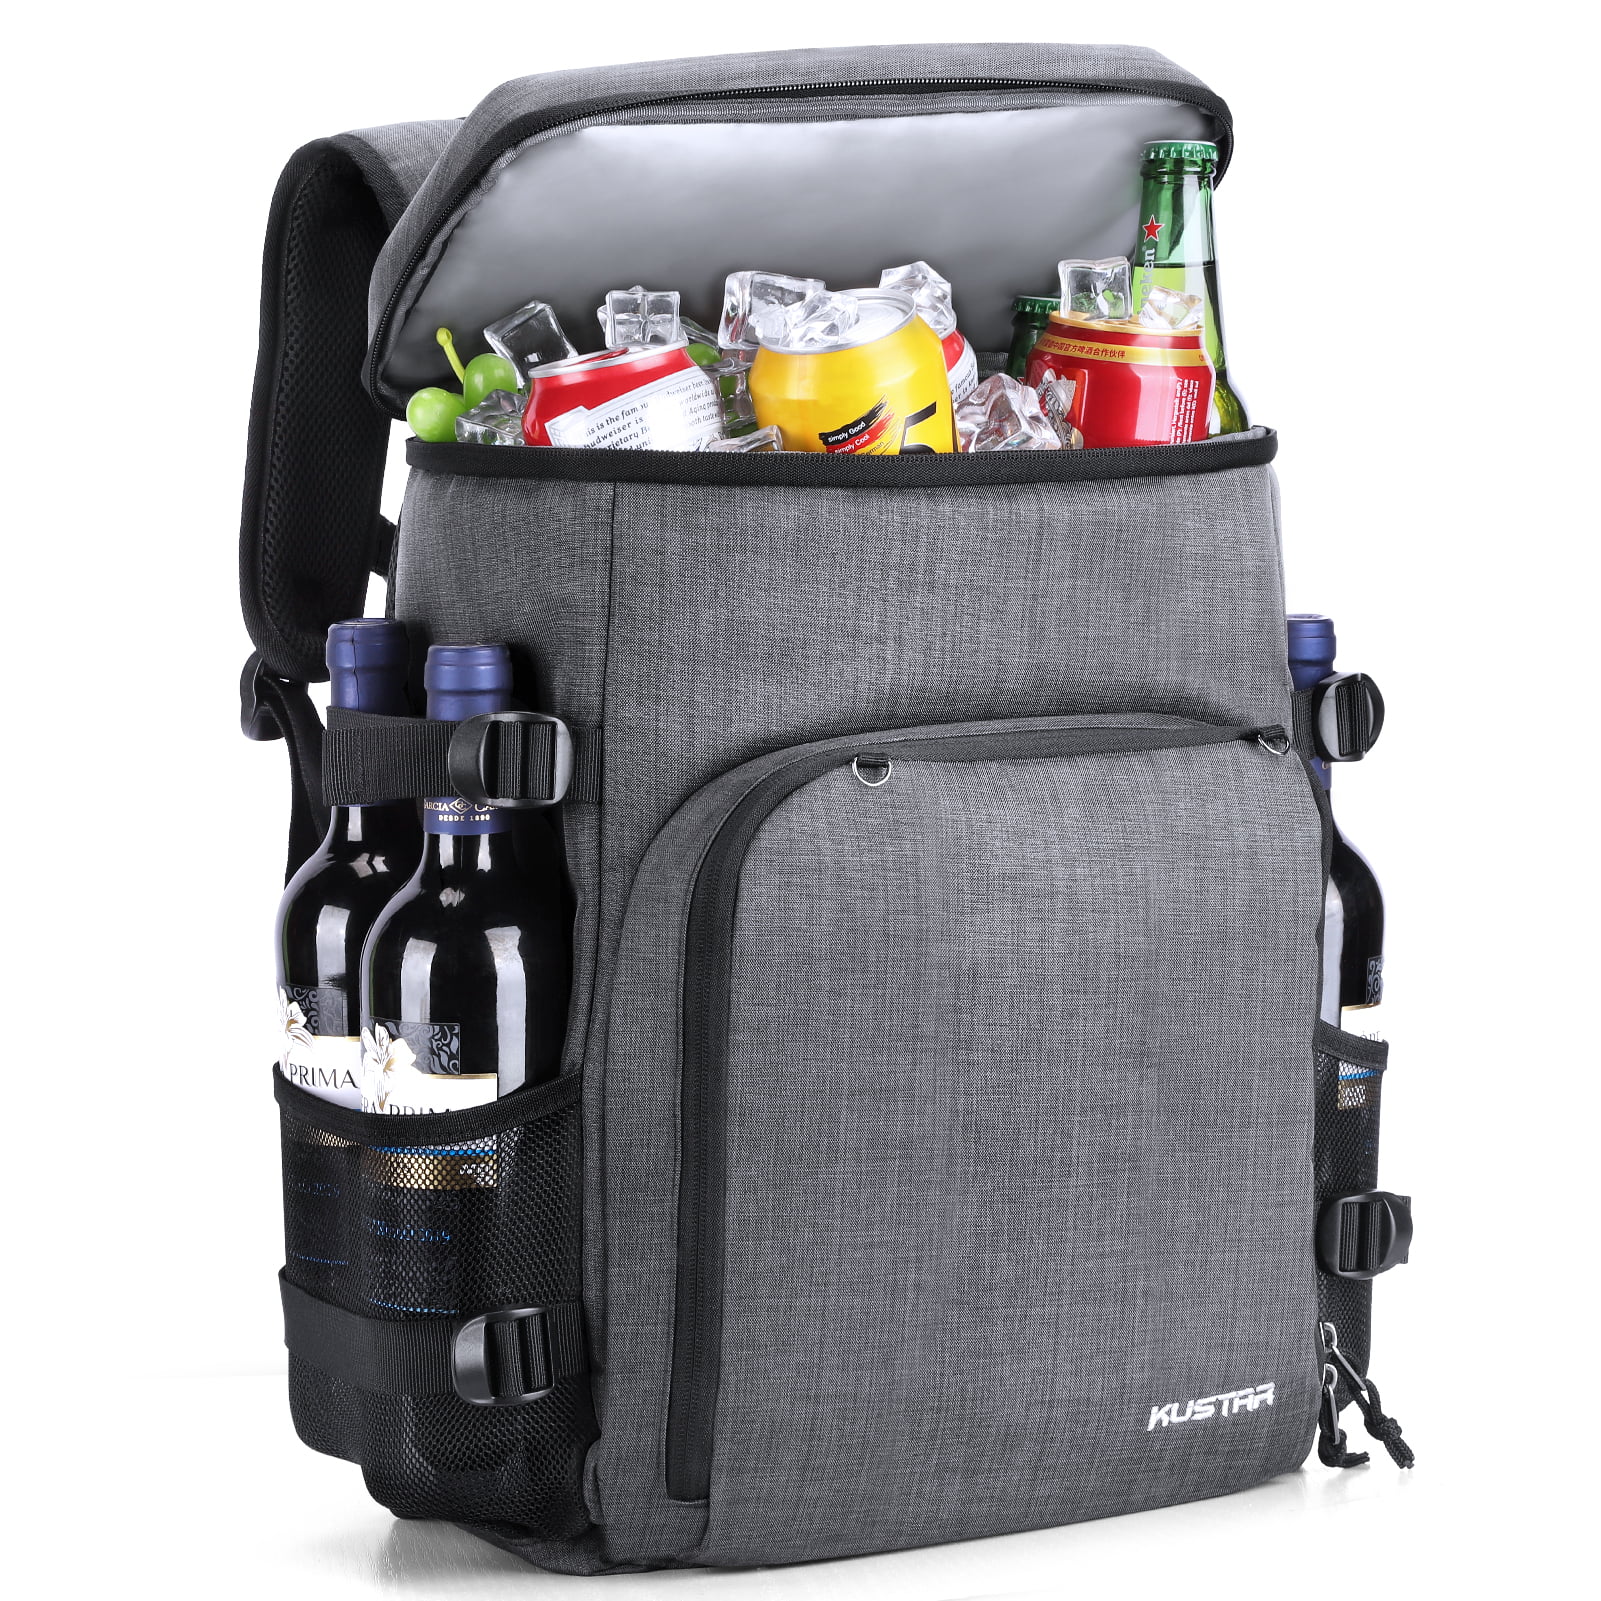 KUSTAR Cooler Backpack 35 Cans,2 in 1 Soft Sided Coolers & Insulated Cooler  Bags for Lunch Bag Camping,Picnic,Hiking,Fishing,Kayaking,Sports & Beach,Black  